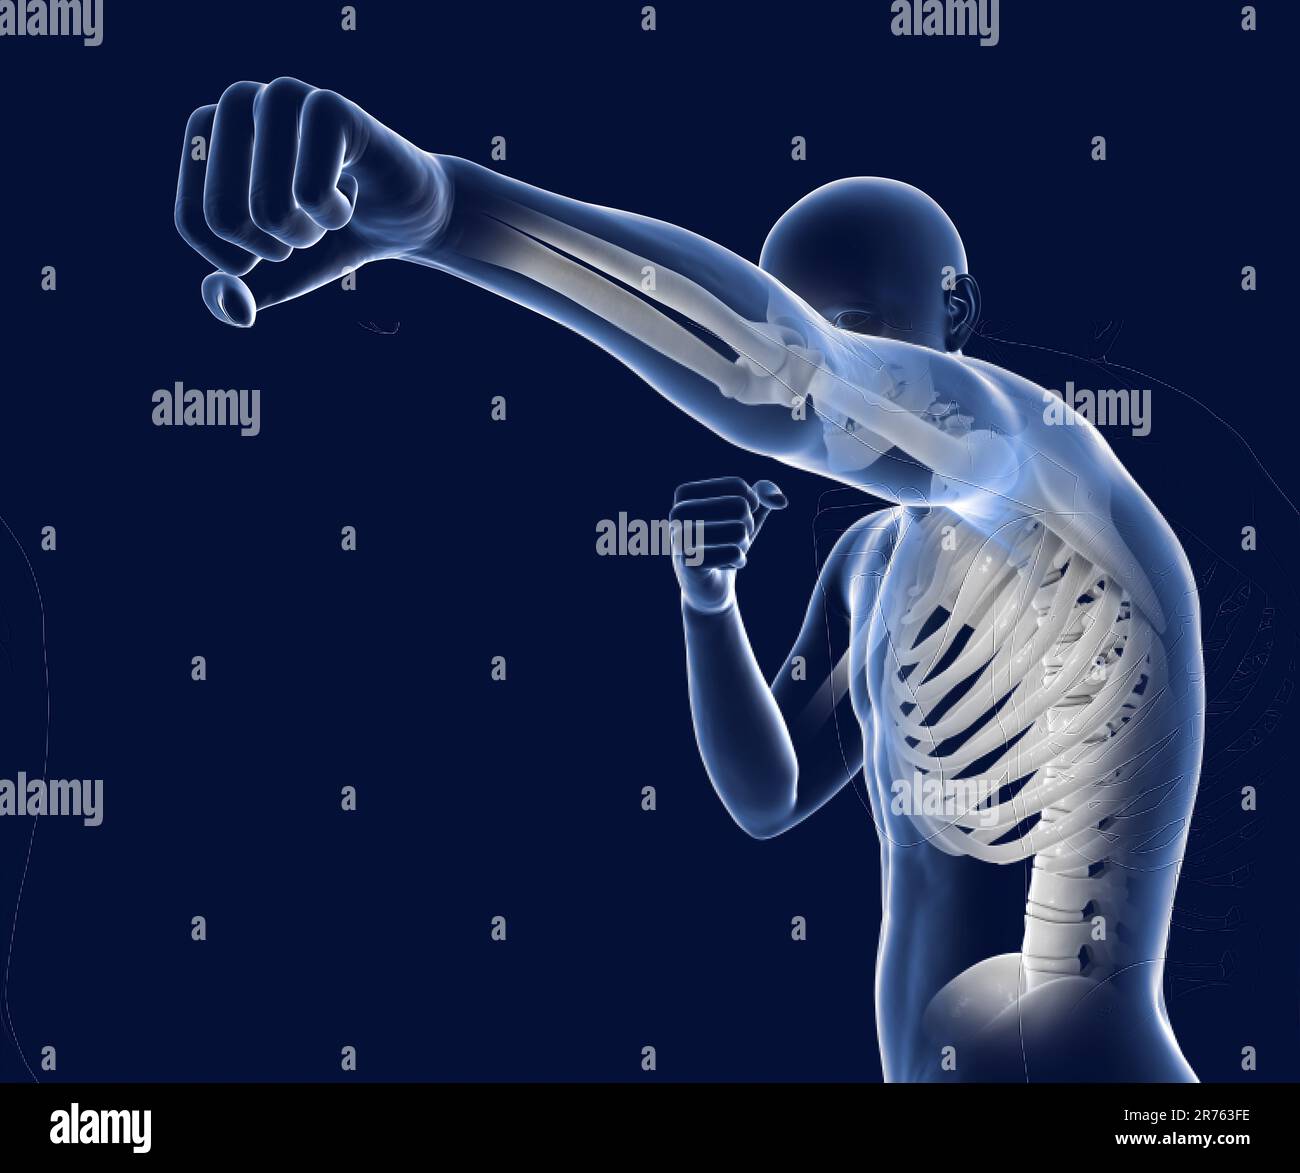 Anatomy of boxing sport, computer illustration. Human male body in ...